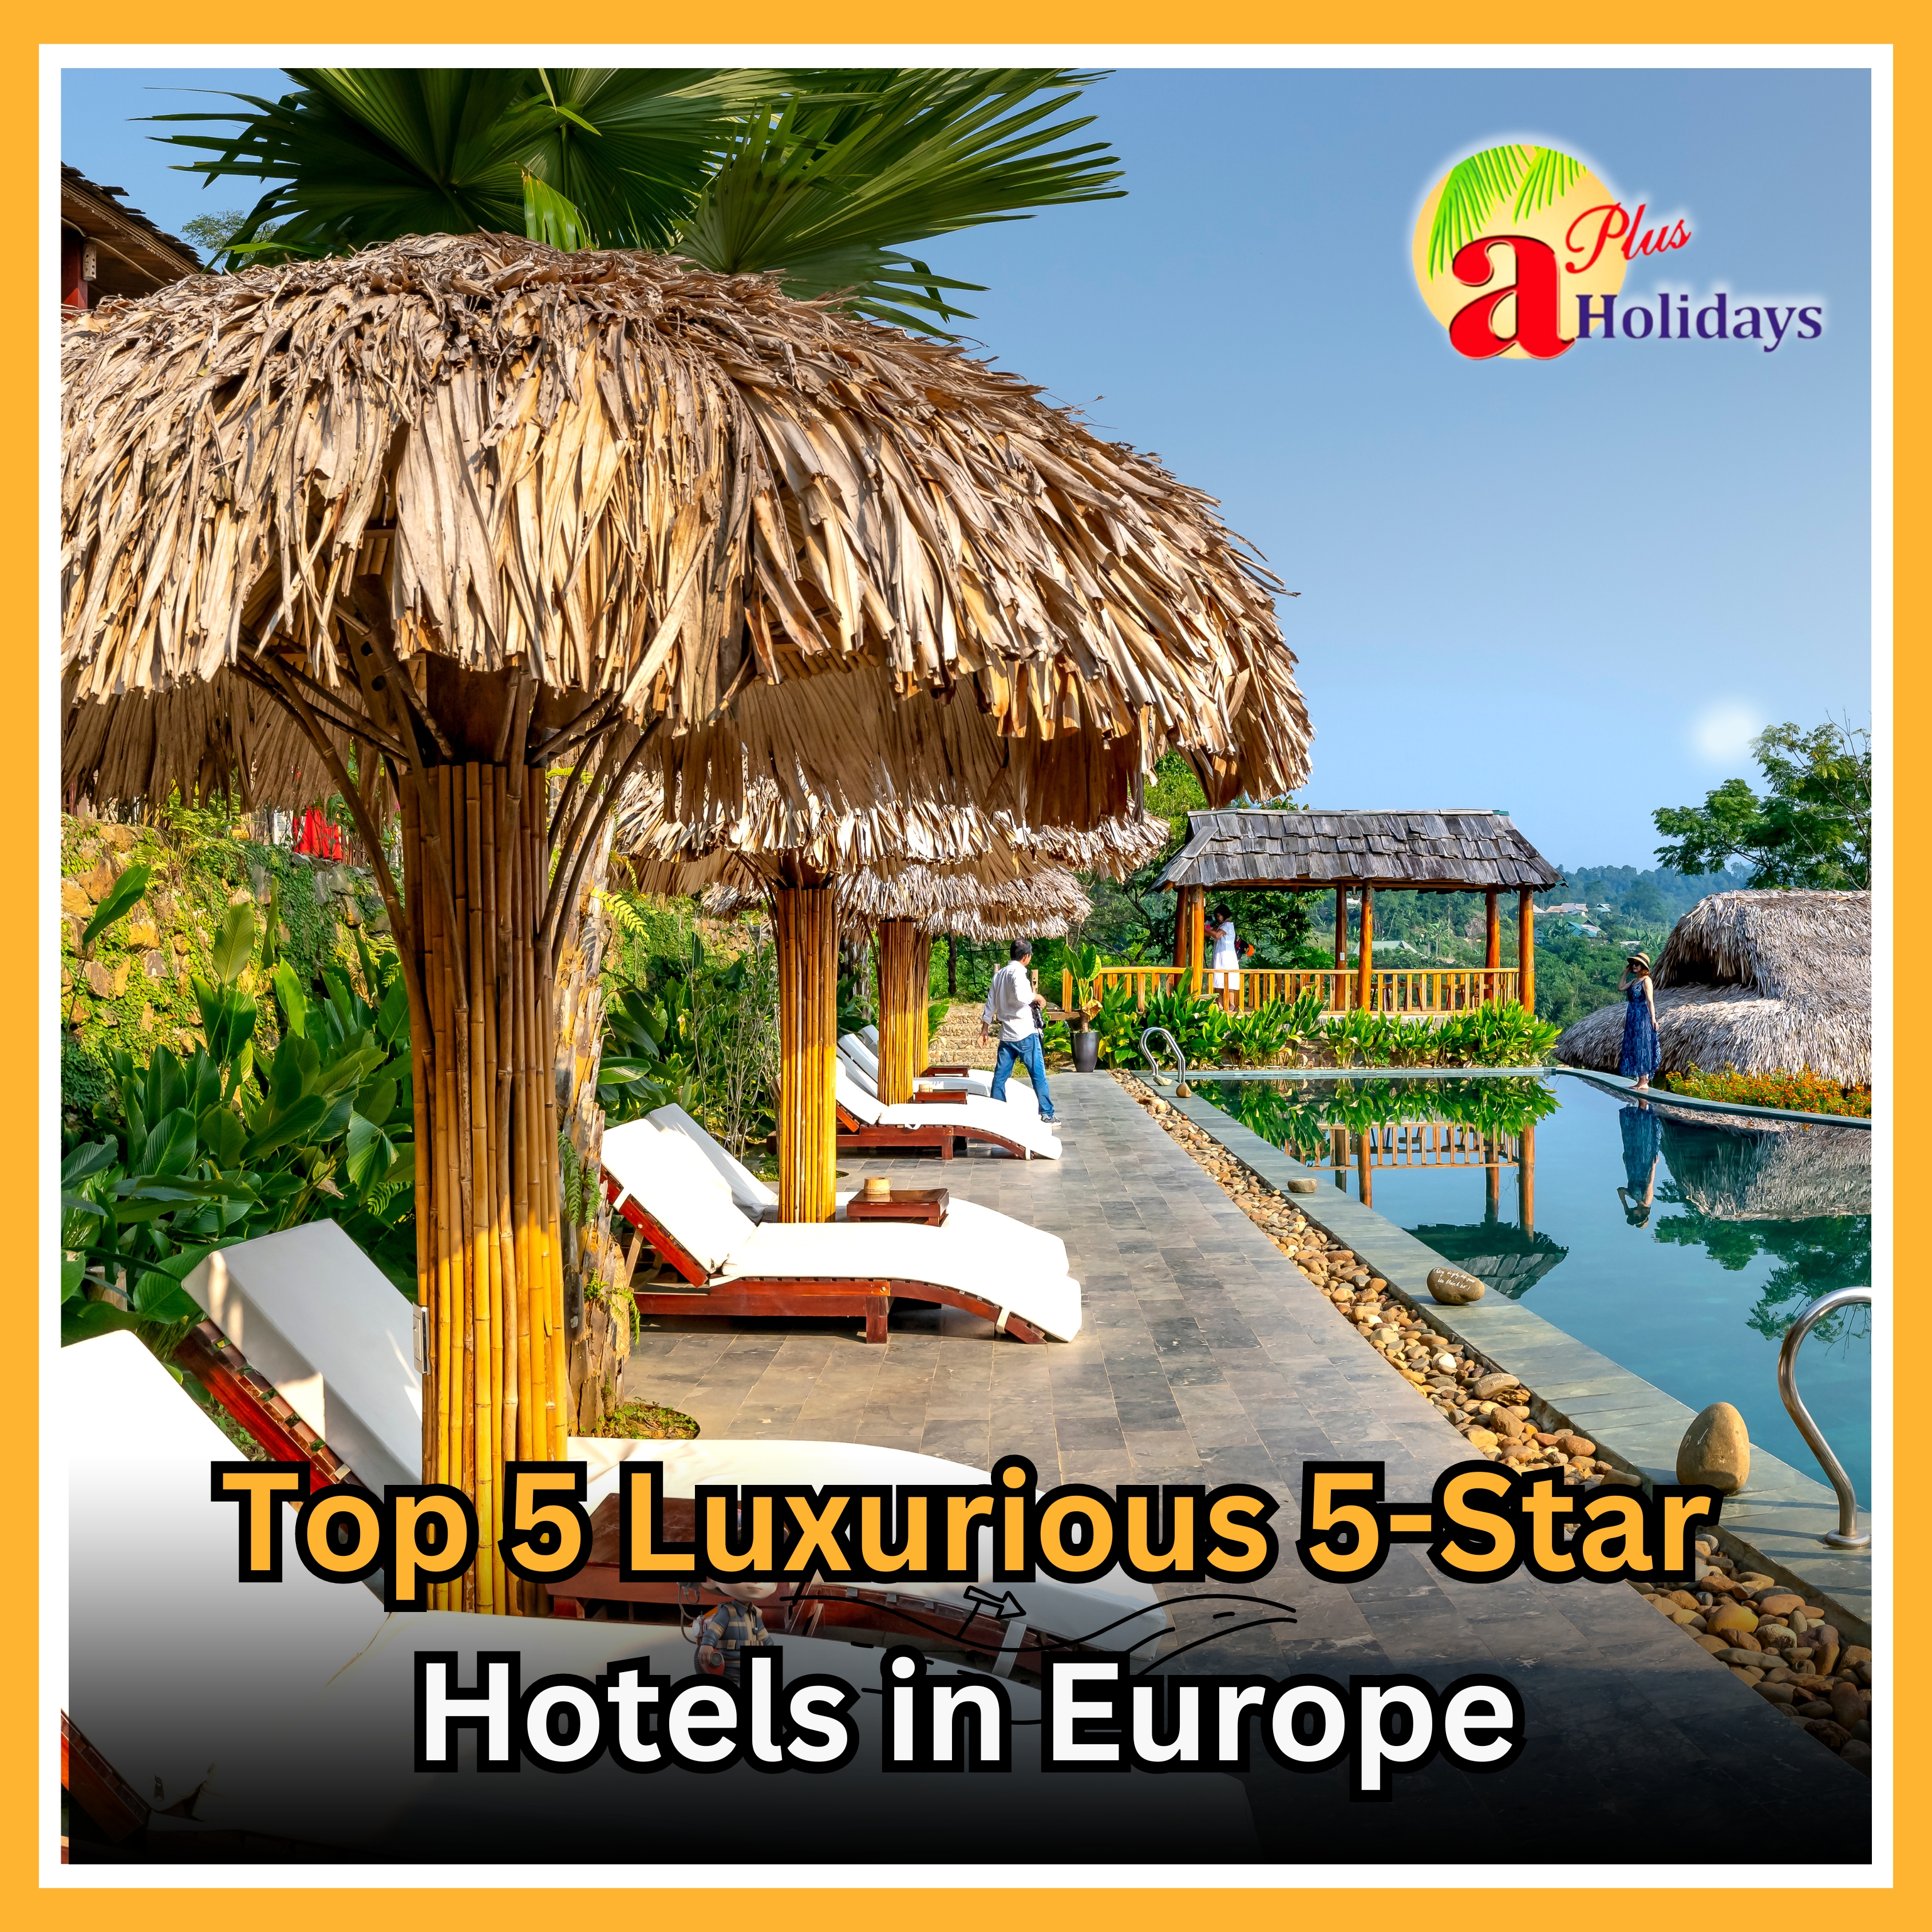 Top 5 Luxurious 5-Star Hotels in Europe